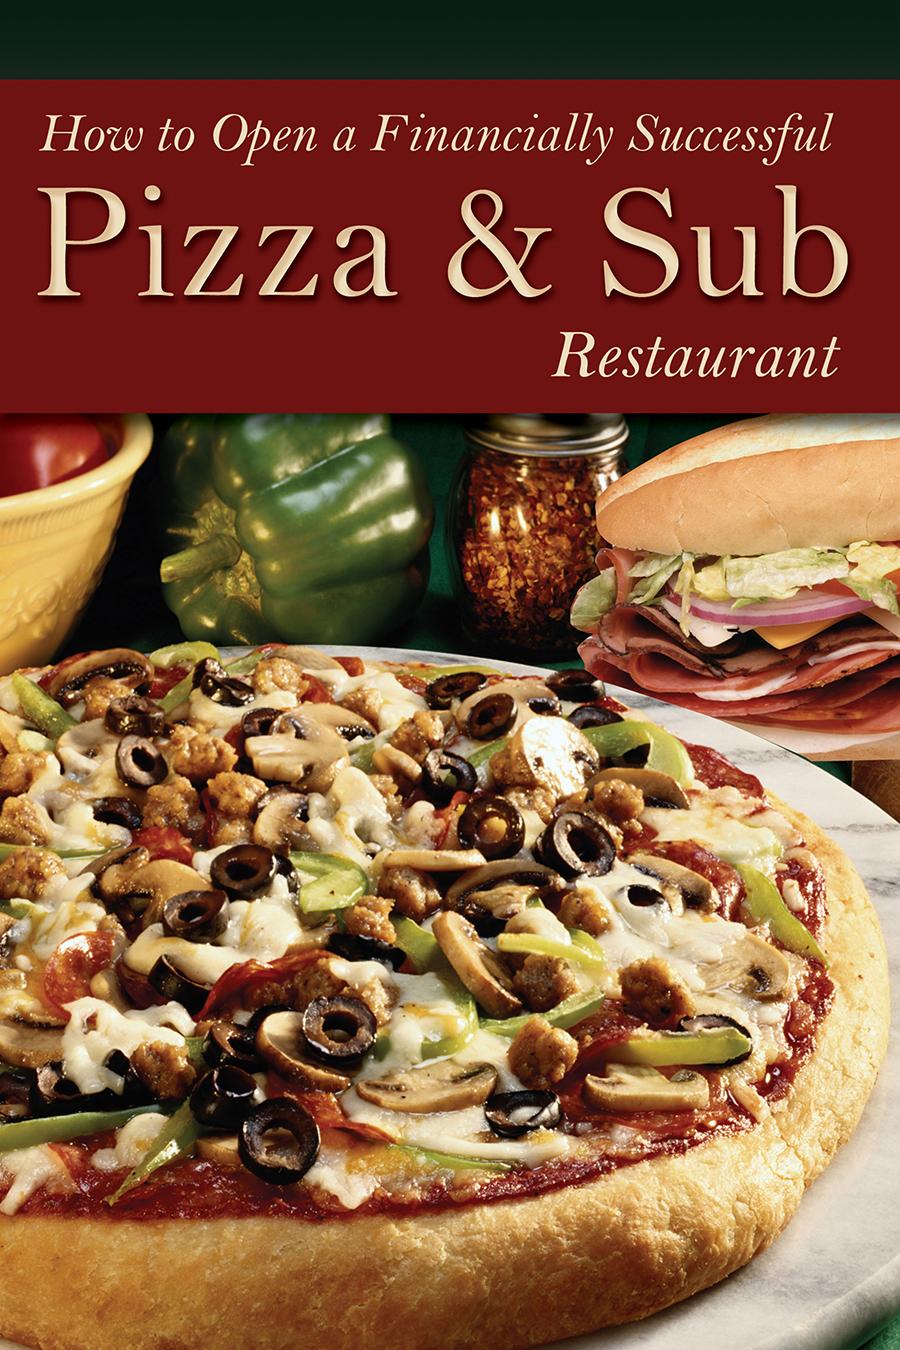 How to Open a Financially Successful Pizza Sub Restaurant by Shri L Henkel - photo 1